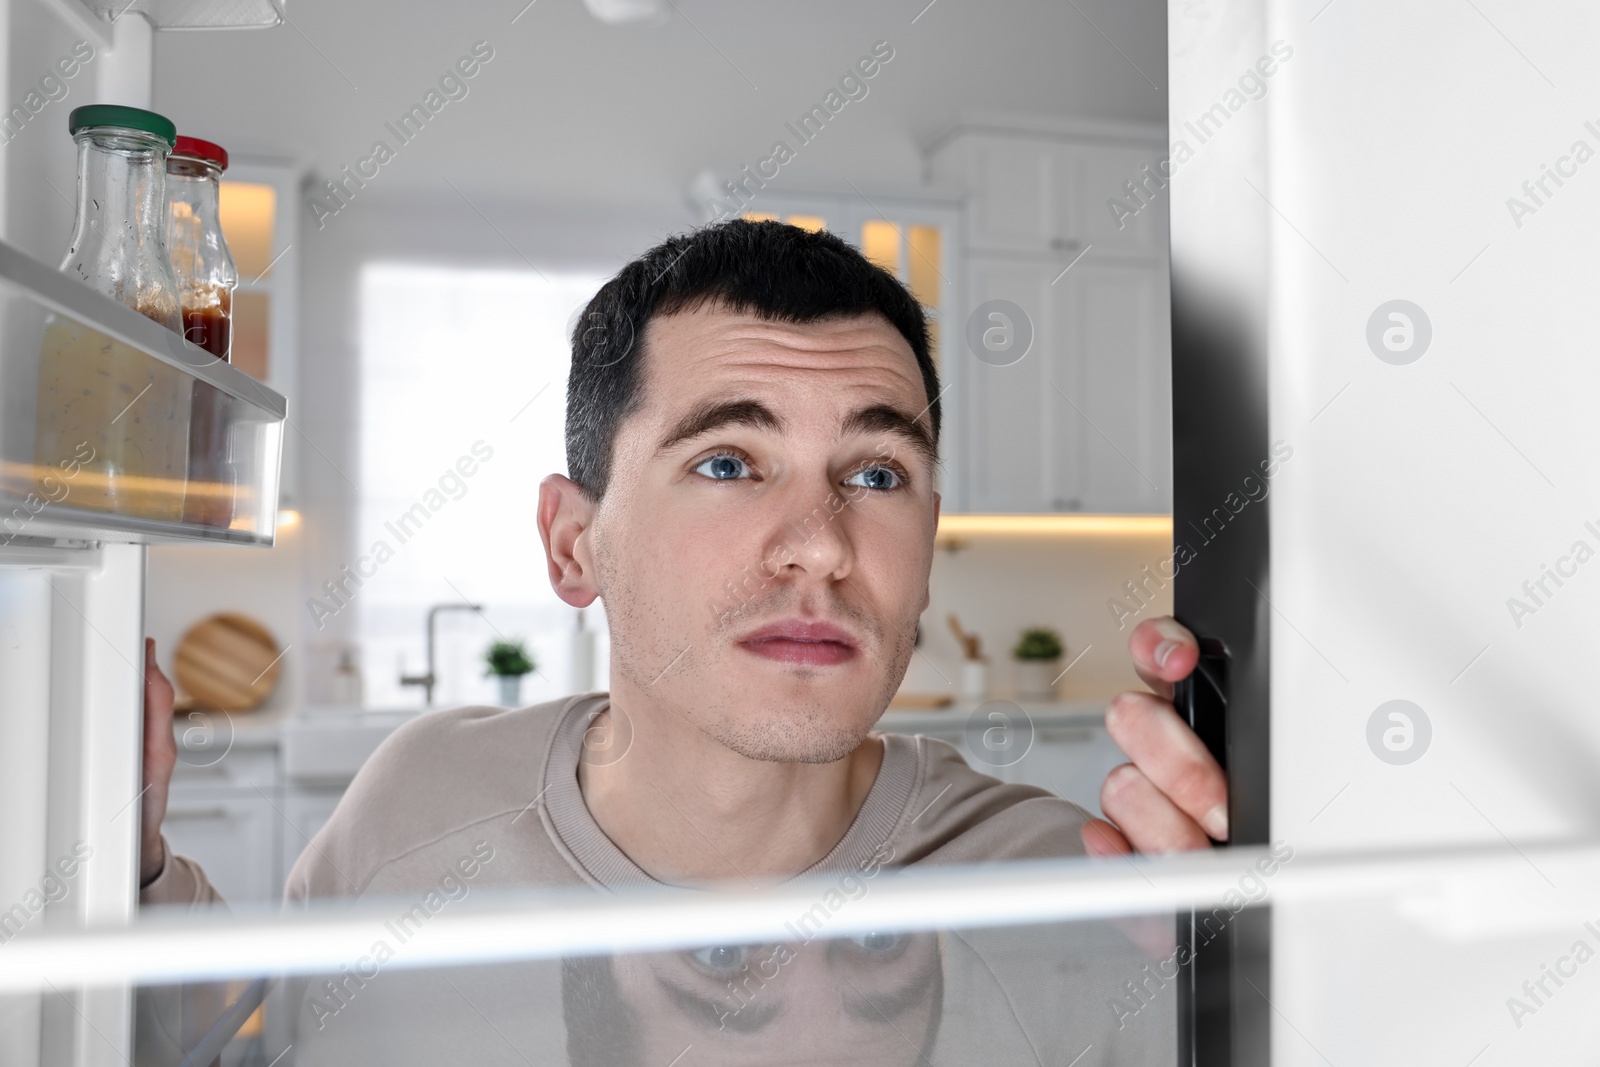 Photo of Upset man near empty refrigerator in kitchen, view from inside